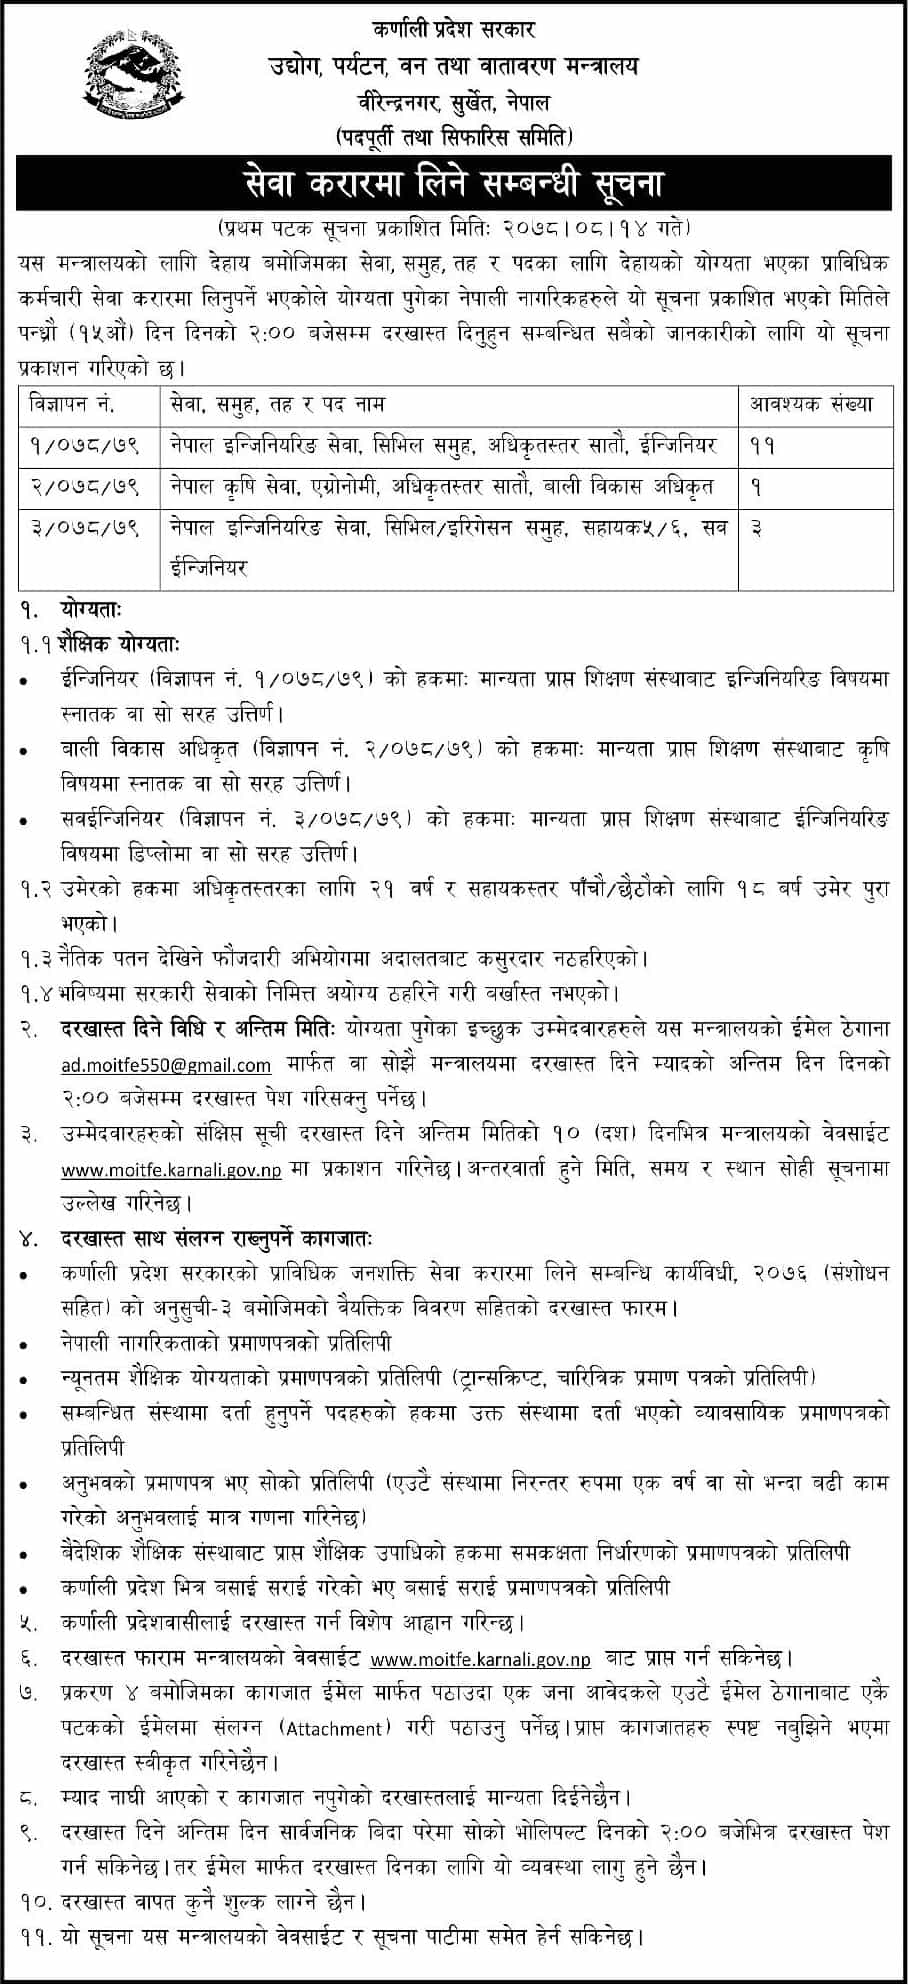 Karnali Pradesh Government Ministry of MOITFE Vacancy for Engineering and Agriculture Services